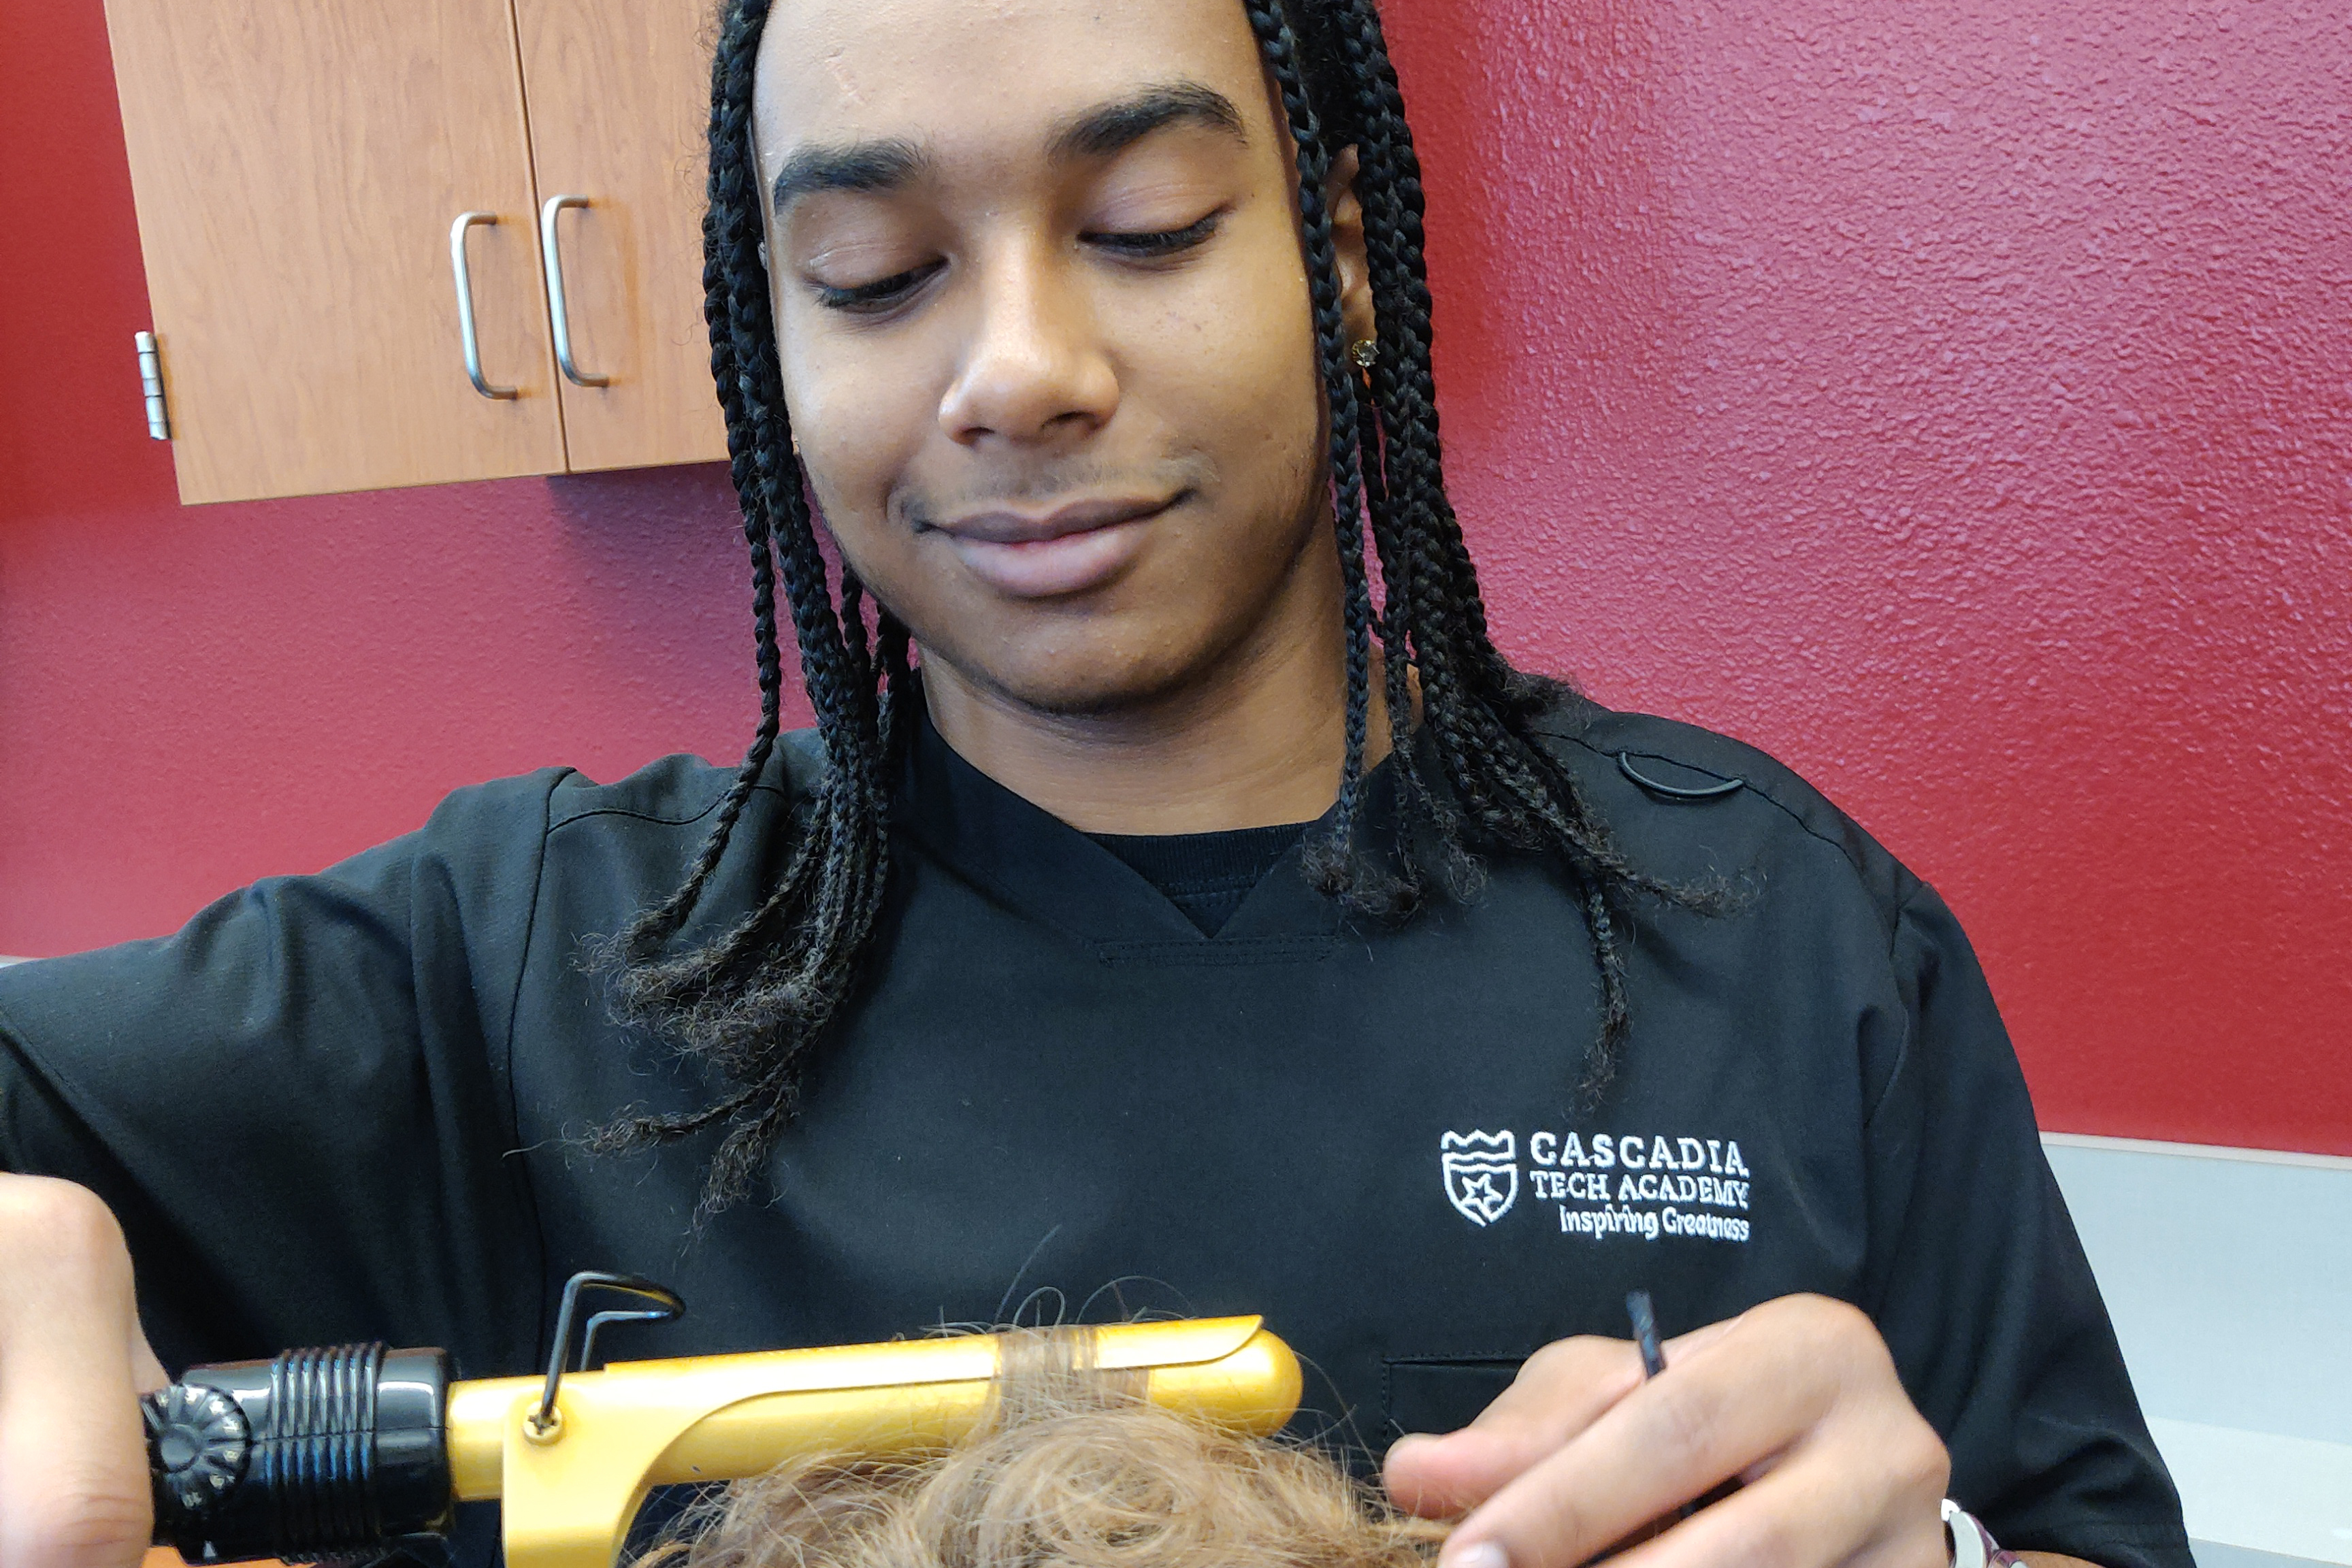 STUDENT USING A CURLING IRON